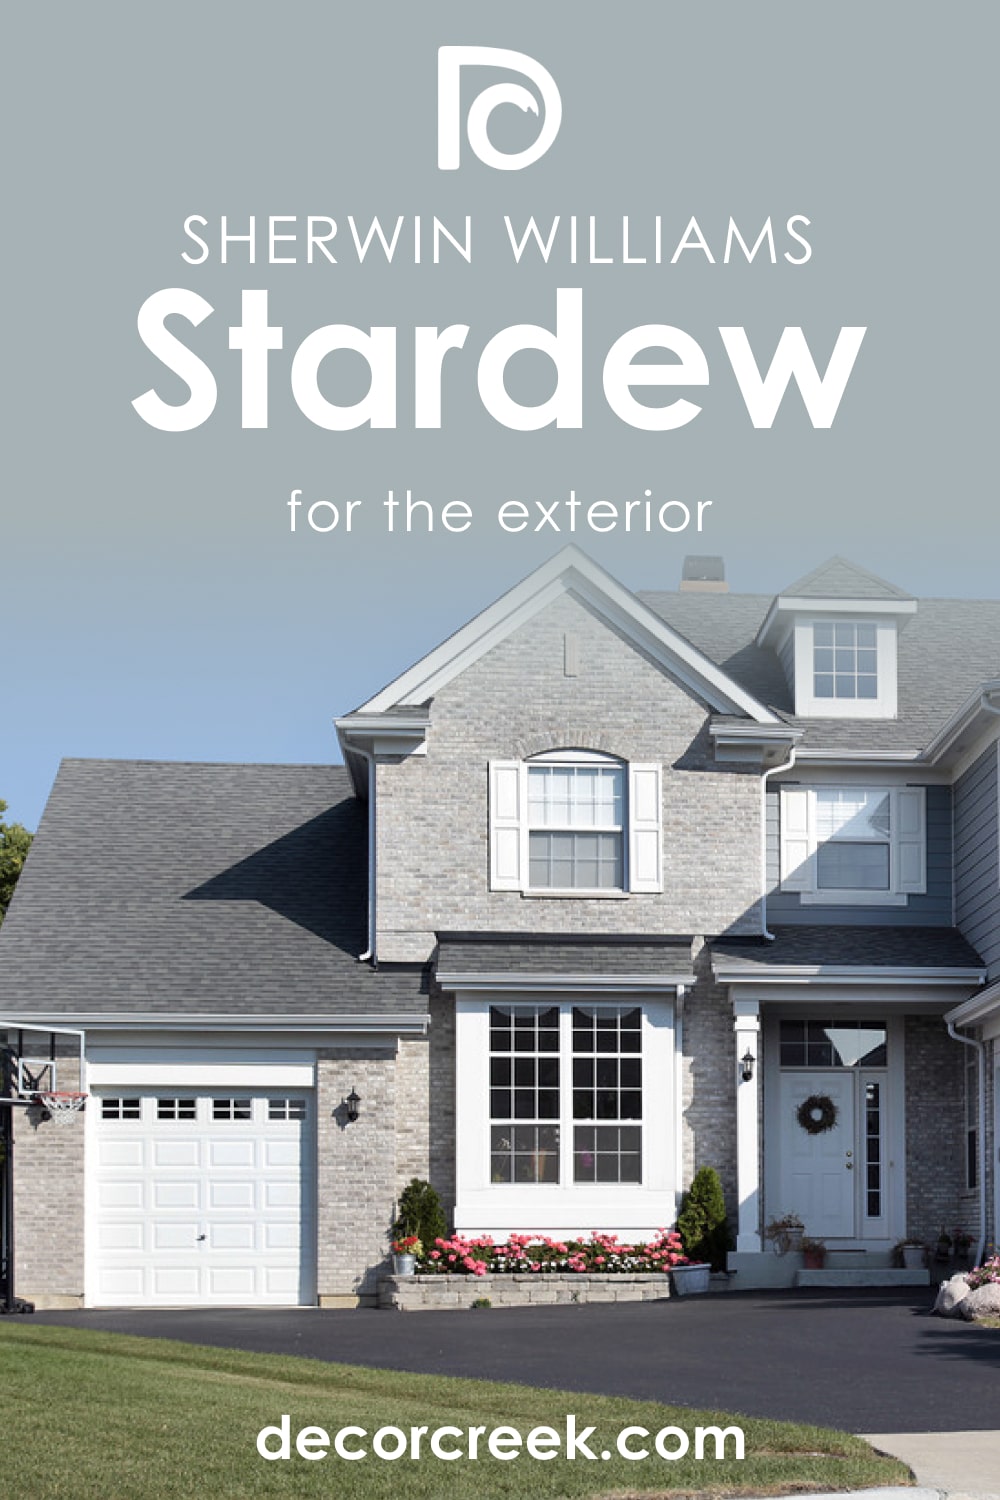 Stardew SW-9138 for the Exterior Use